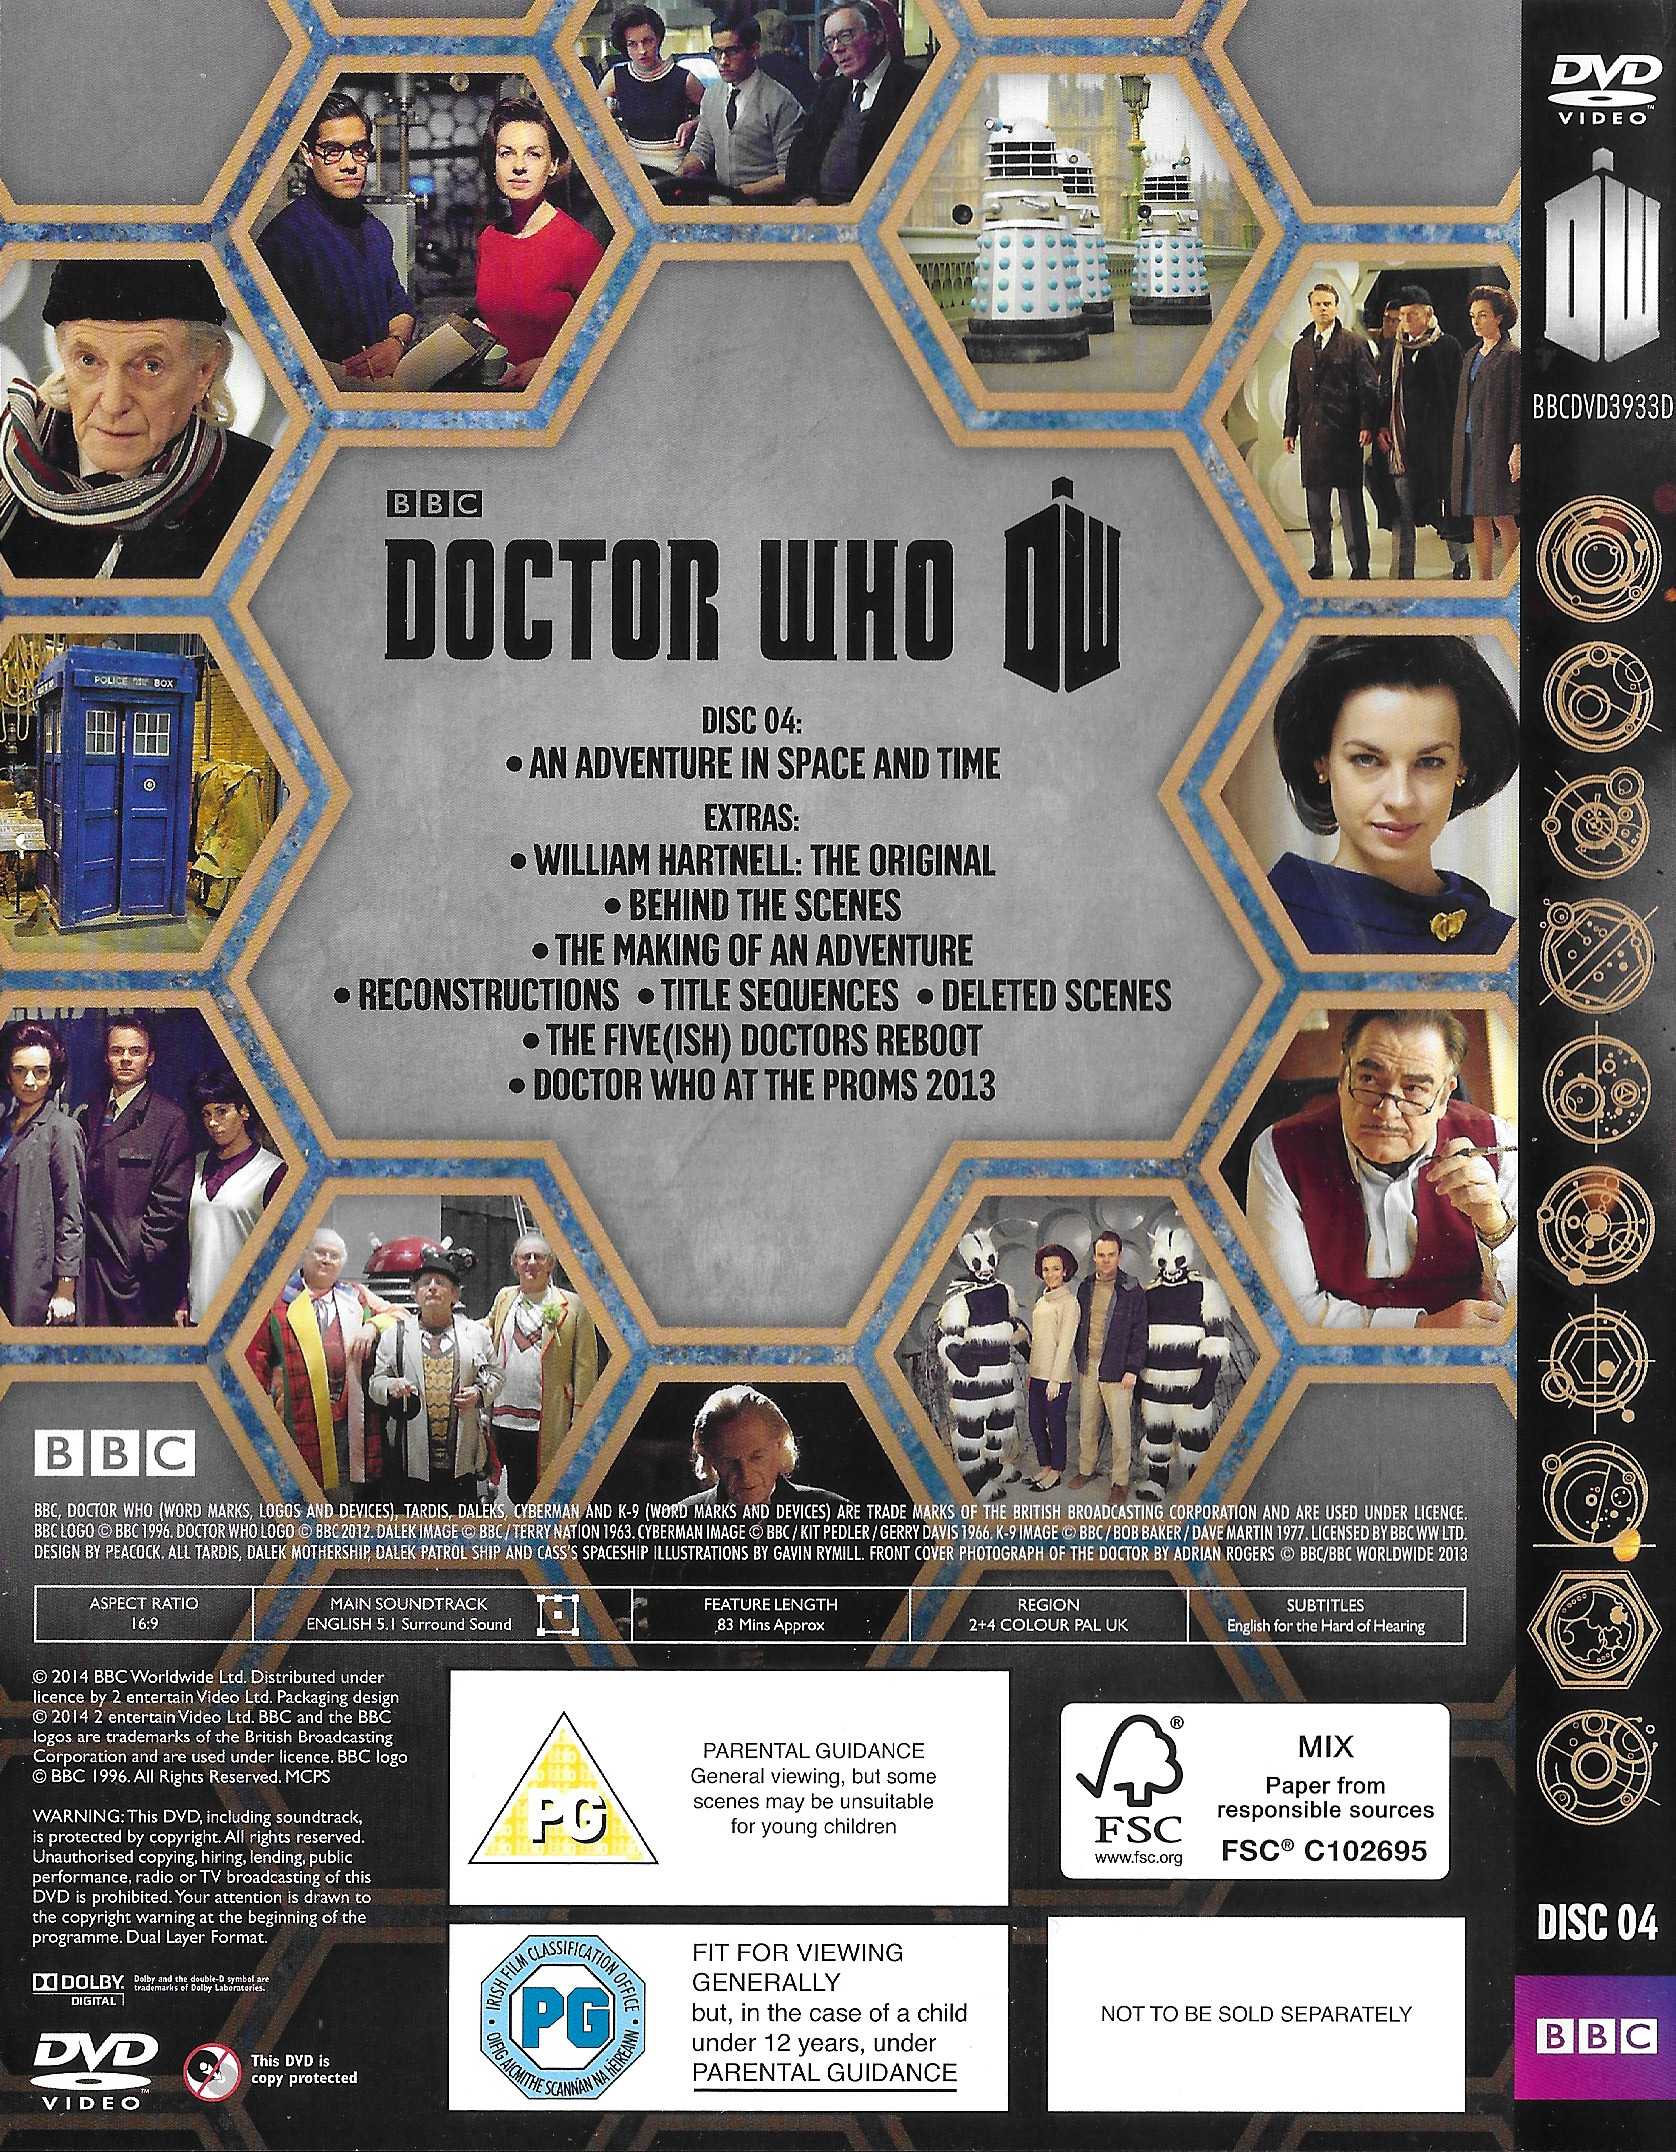 Picture of BBCDVD 3933 04 Doctor Who - An adventure in space and time by artist Mark Gatiss from the BBC records and Tapes library